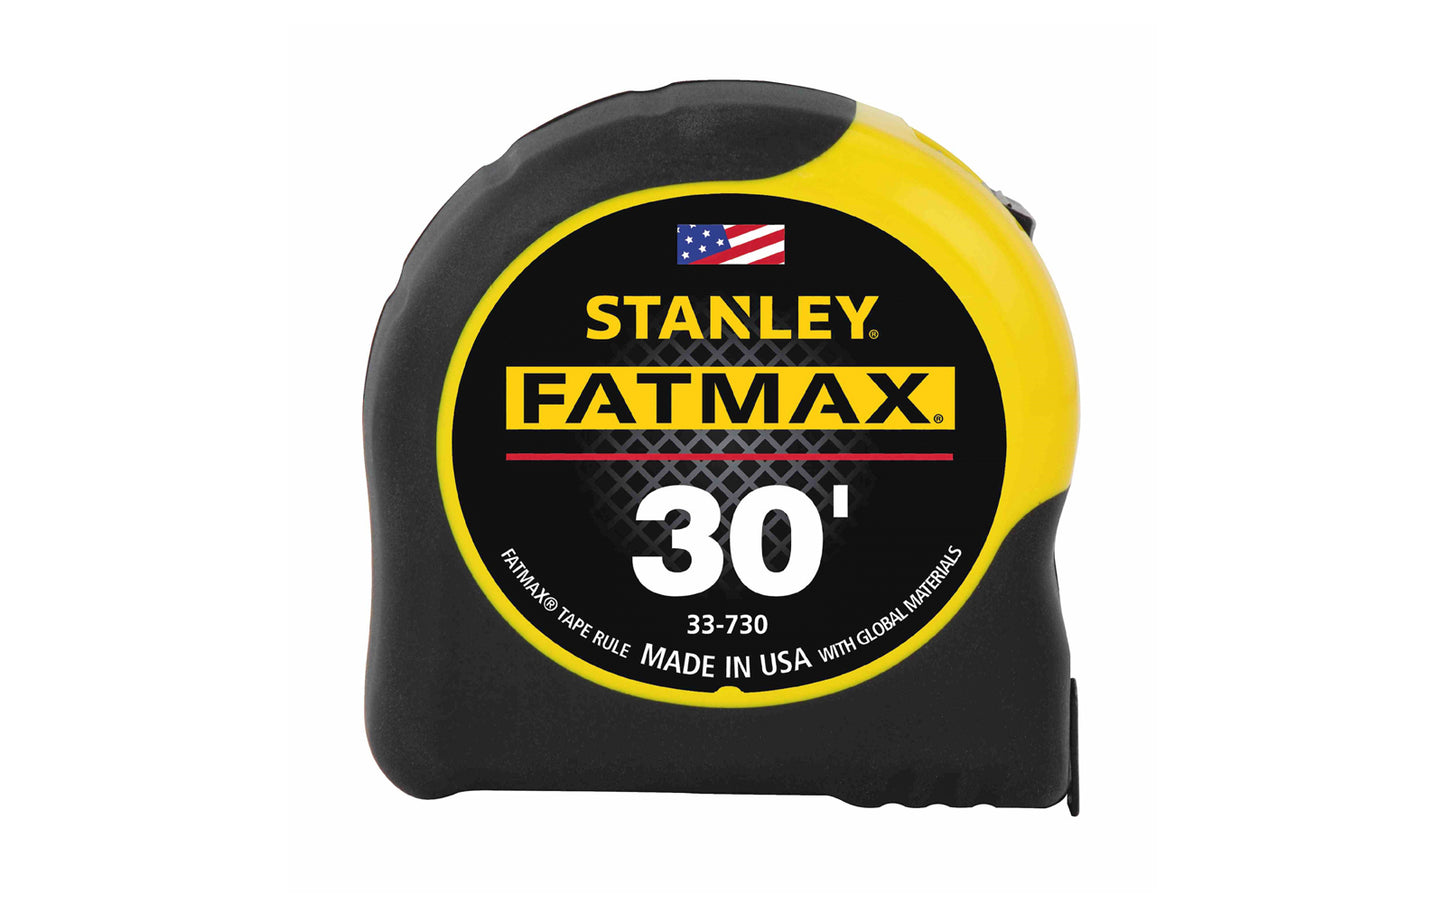 Stanley Fatmax 30' Tape Measure ~ 33-730 - Made in USA